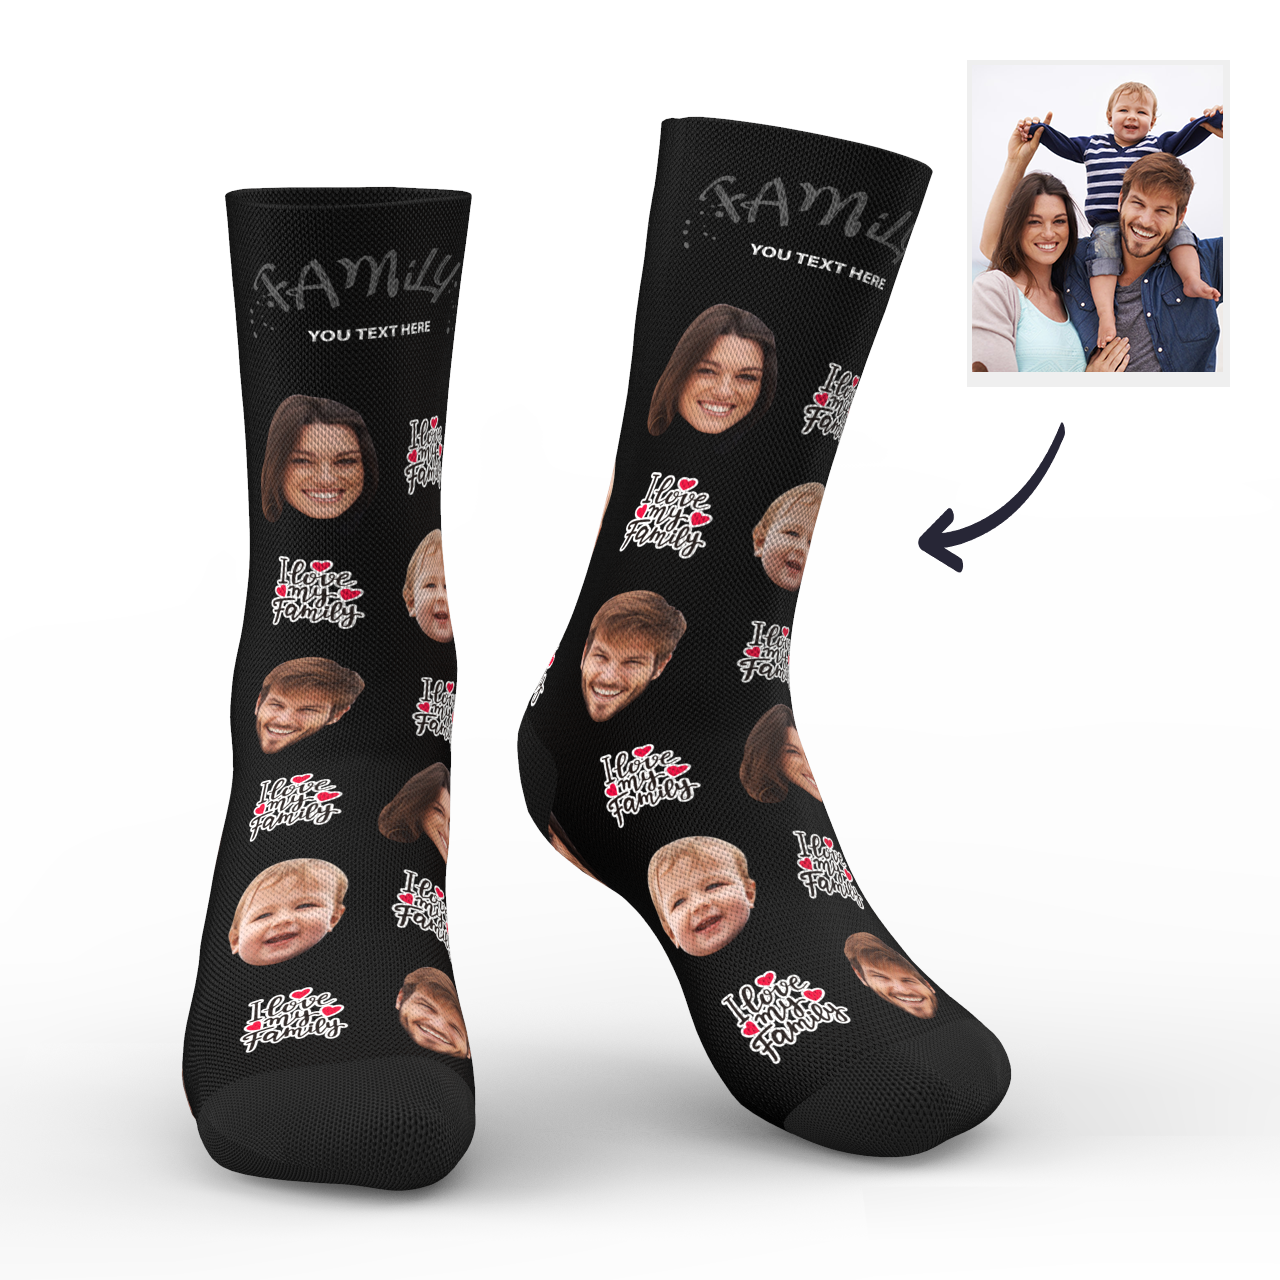 Valentine's Gifts Custom Face Socks Photo Socks Personalised Family Socks with Your Text